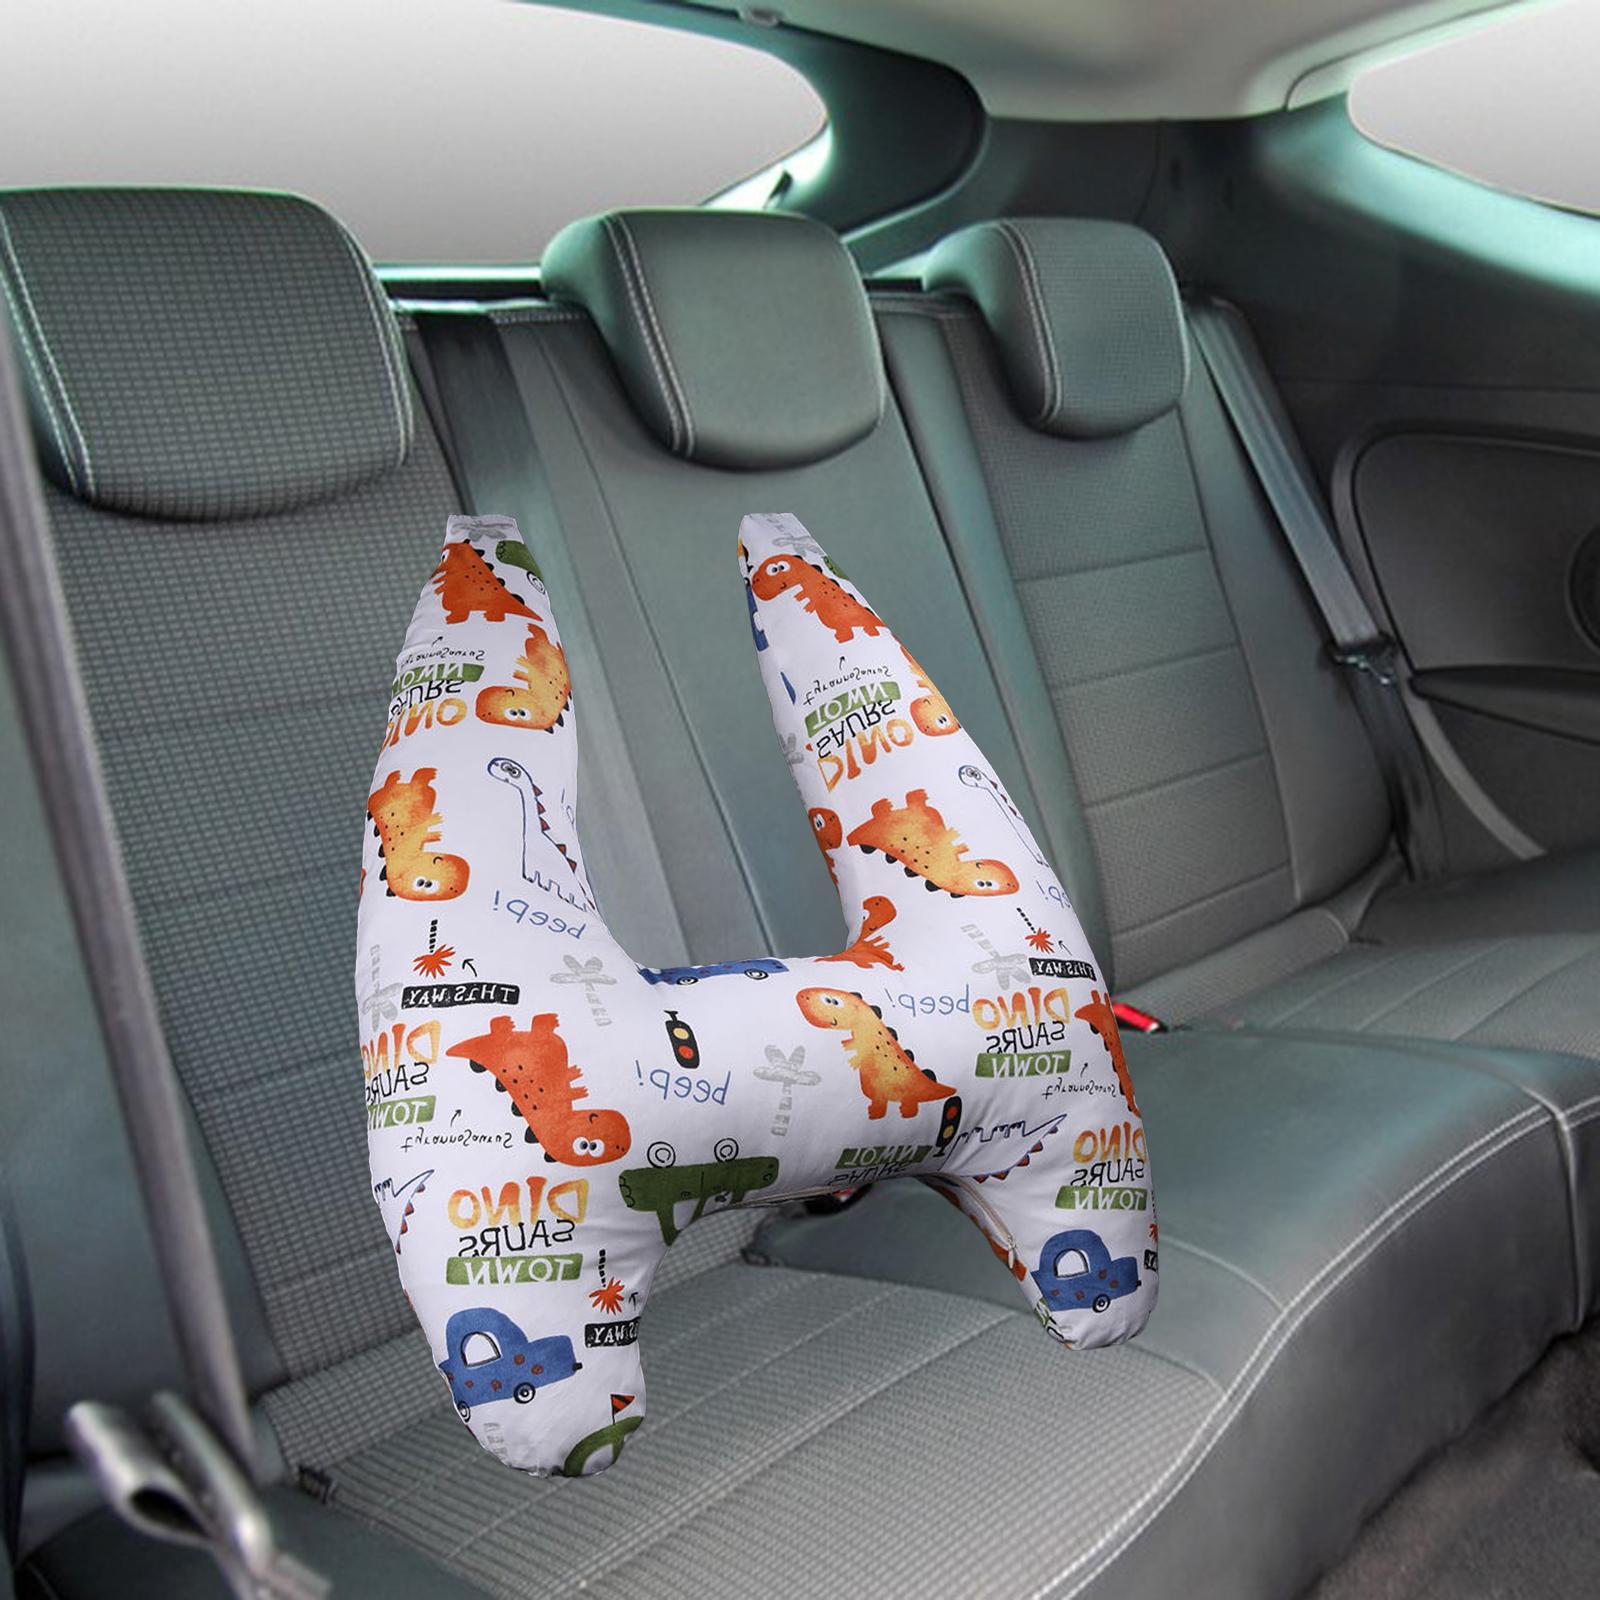 Car Back Seat Travel Pillow Provides Head and Body Support Sleeping Pillow Orange Dinosaur